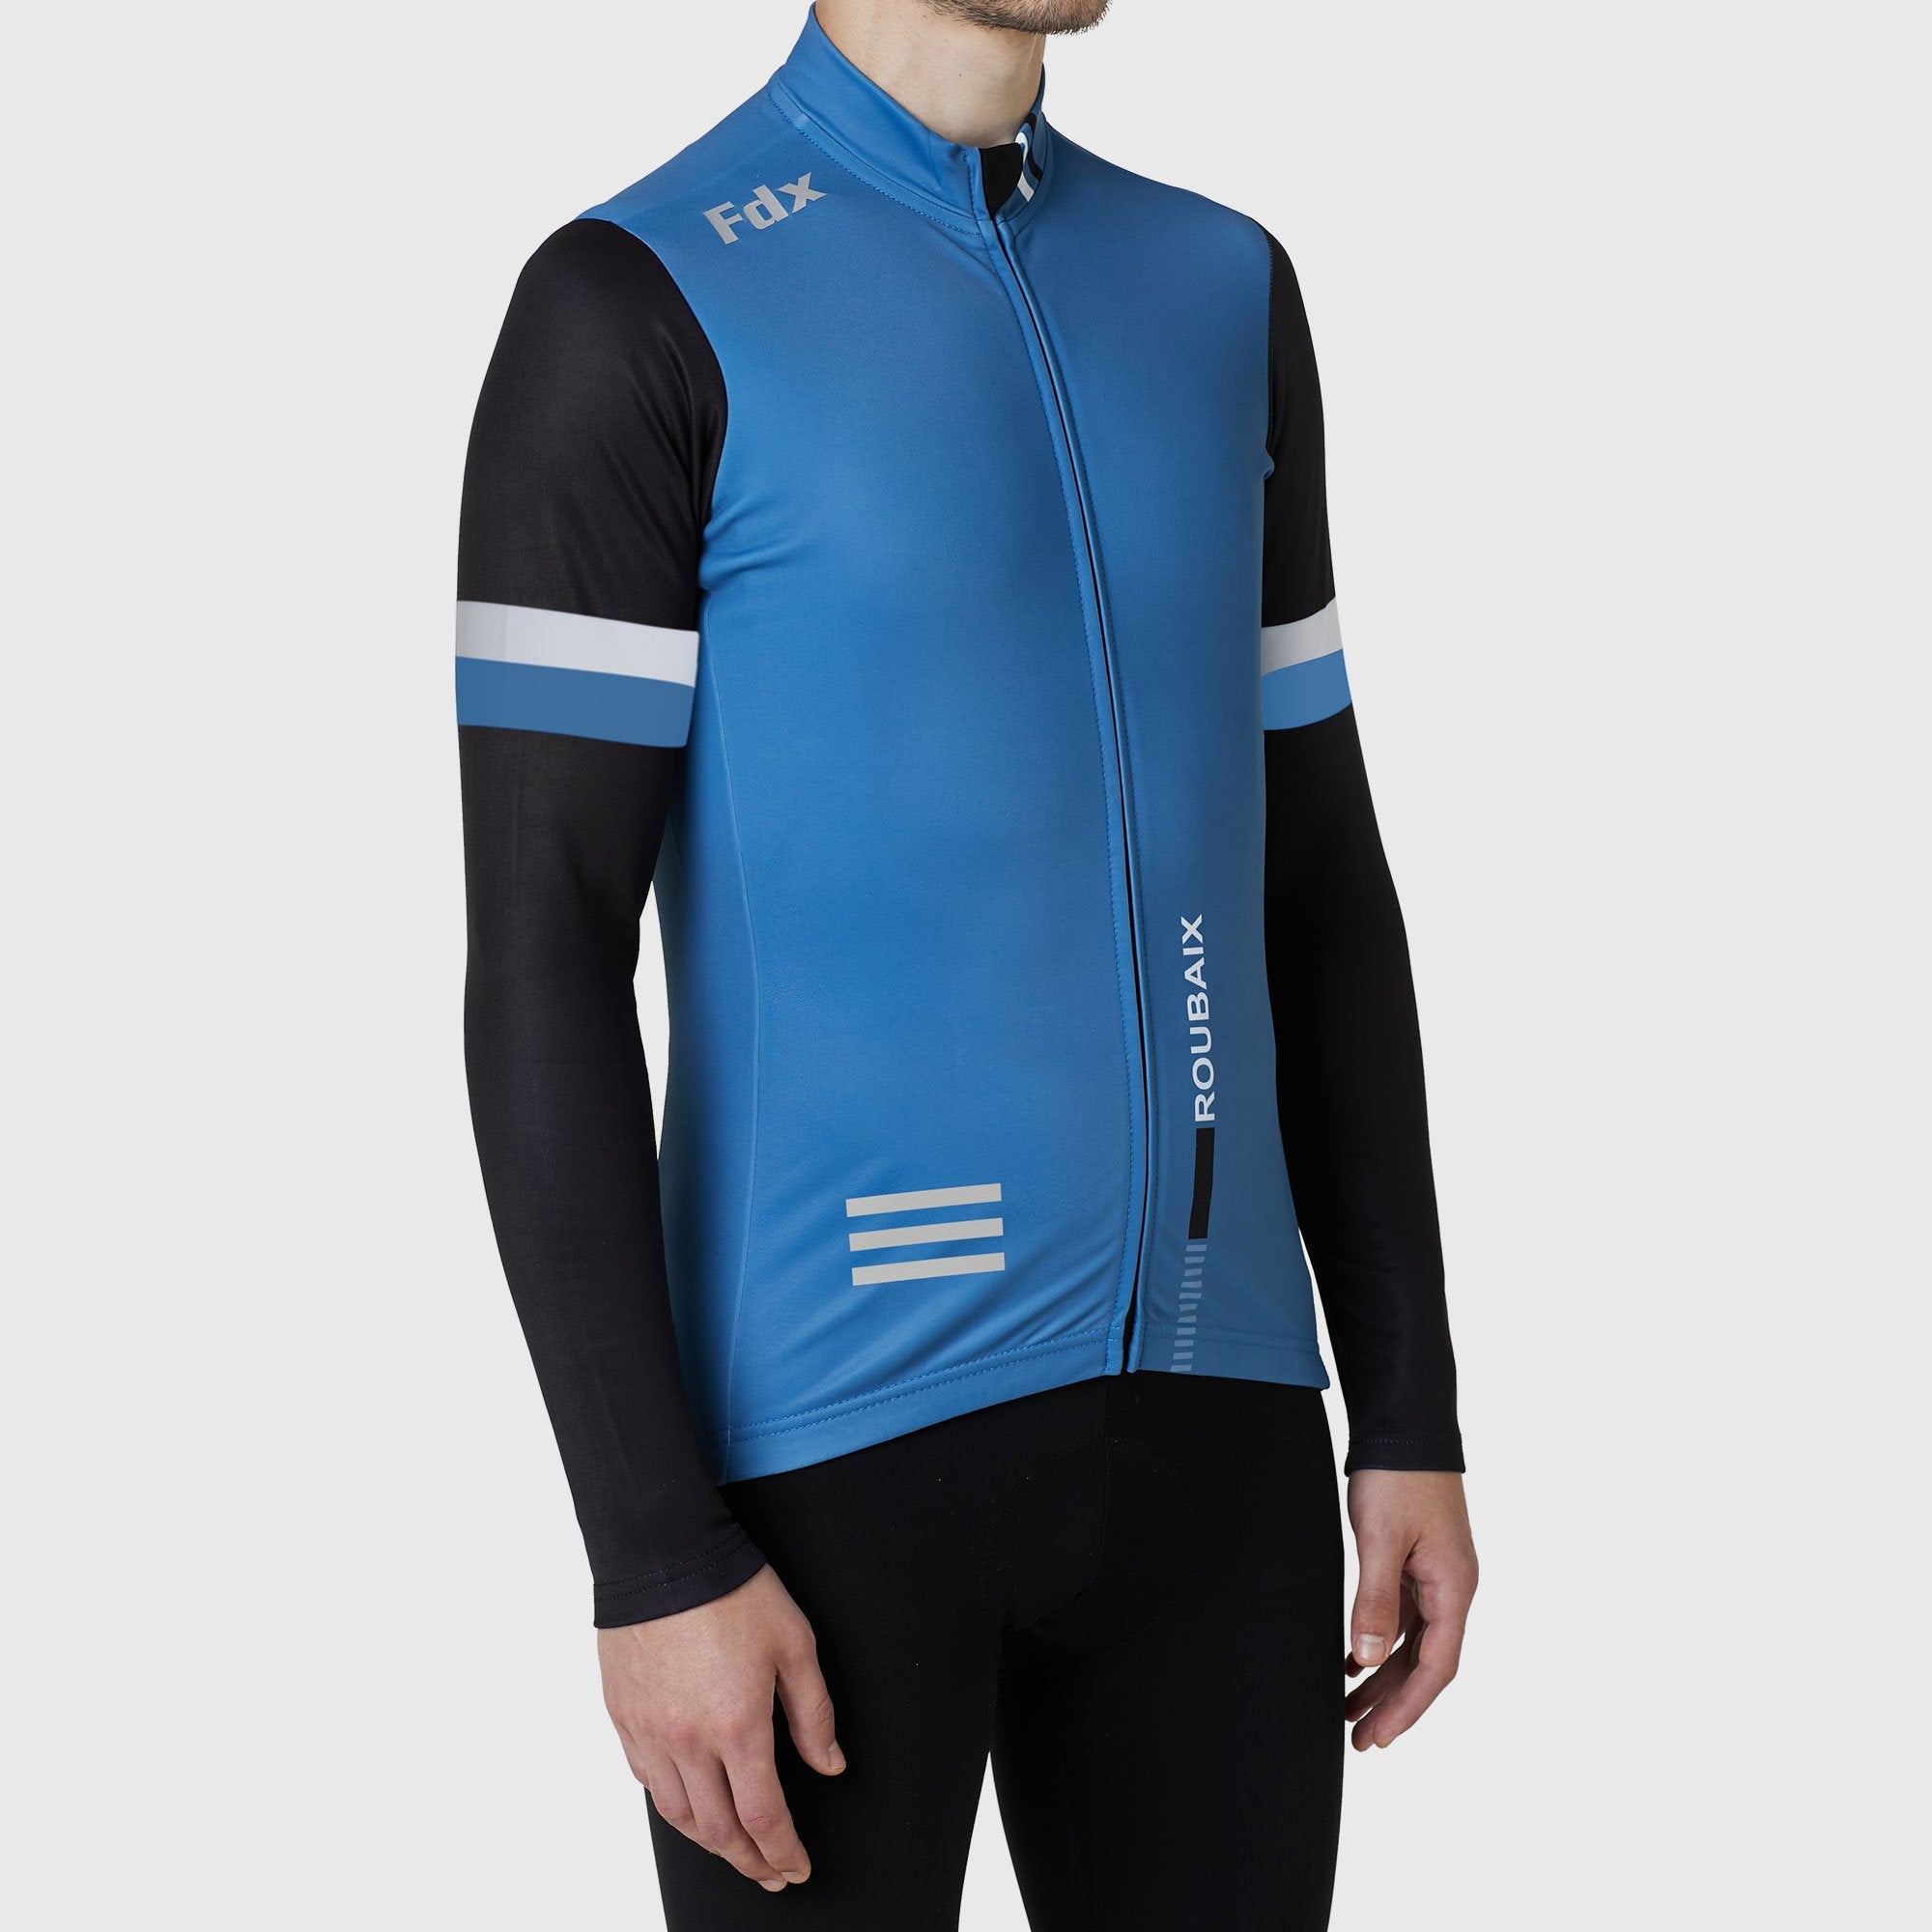 Limited FDX Cycling Sports® US Sleeve Edition Blue Jersey FDX Thermal | Sports - Men\'s Long Fdx